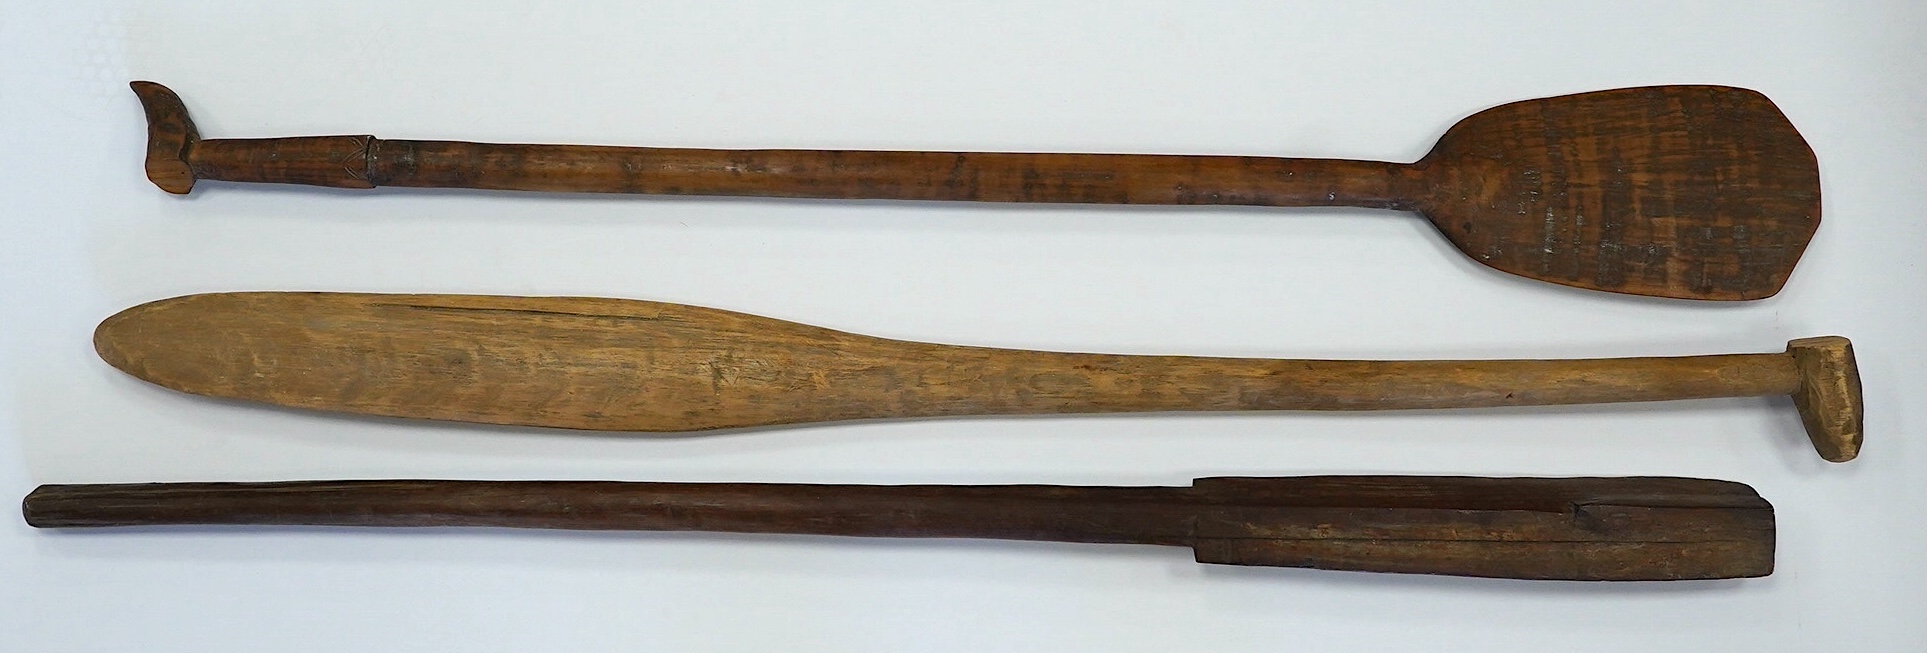 Two tribal carved wood paddles and an ironwood club, longest 104cm. Condition - poor to fair, one paddle missing part of the grip, splits to the wood, etc.